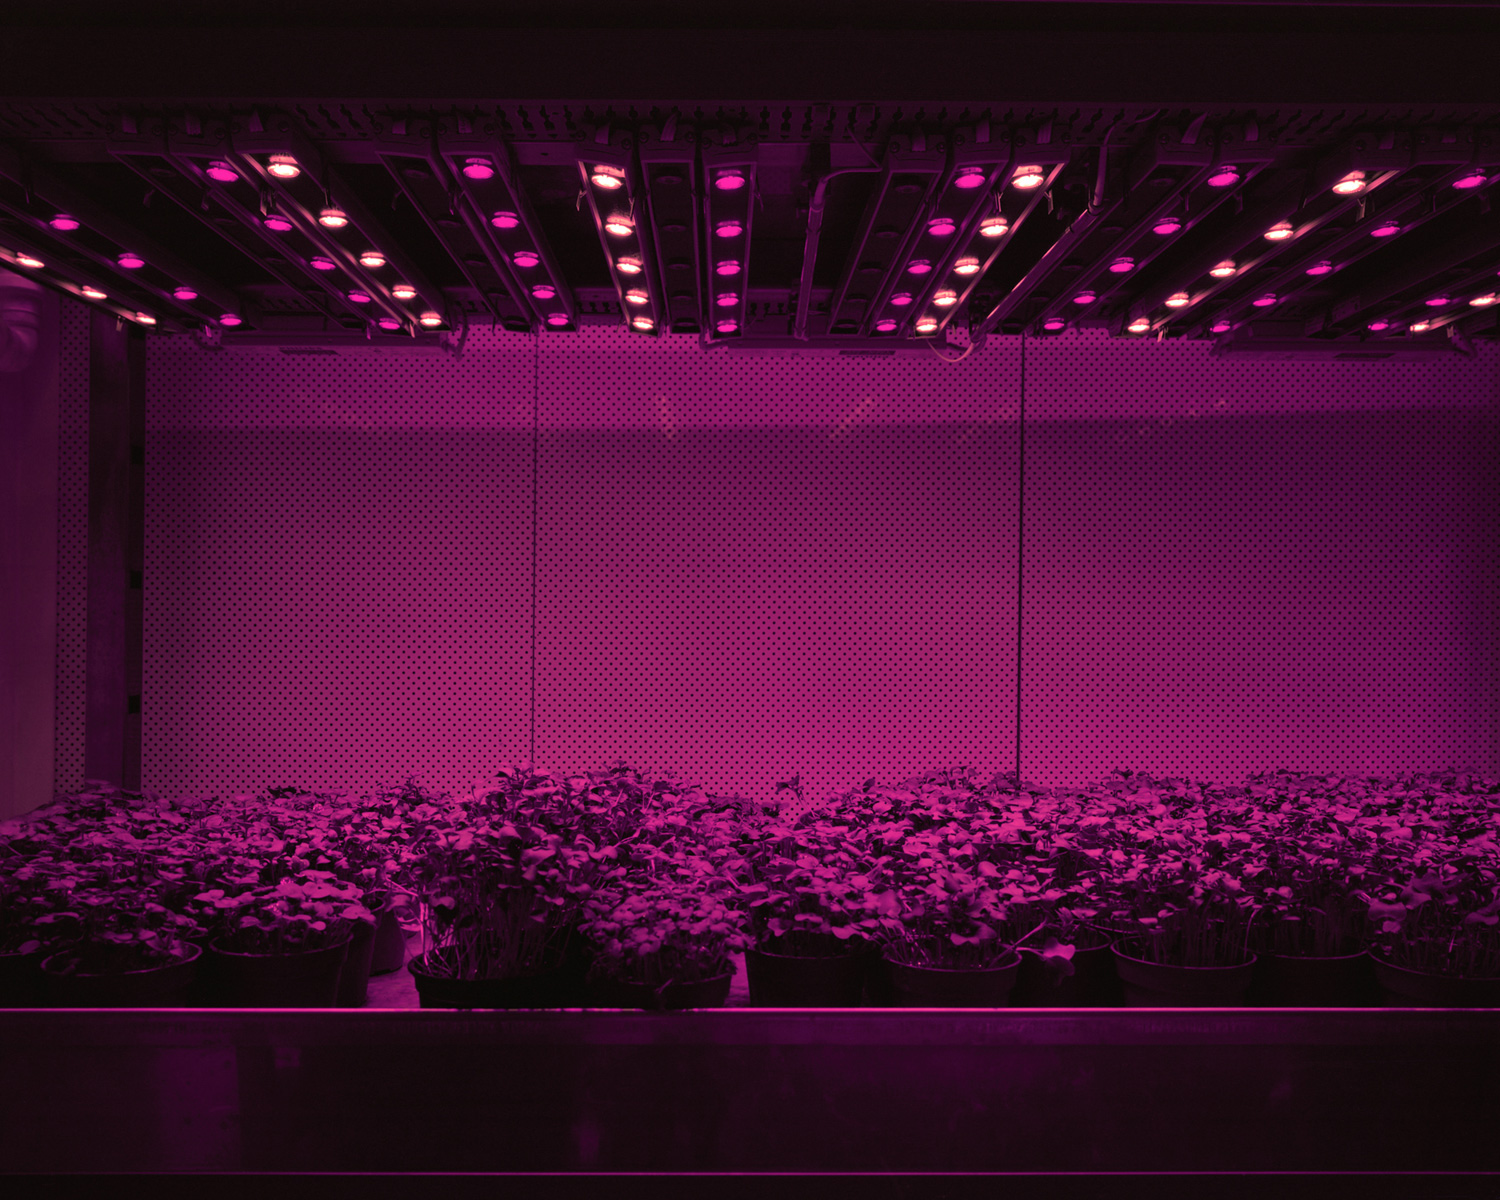  Cress, 2011  Cress, tomatoes, cucumbers, or lettuce are grown in closed systems just with LED lights. There is no sunlight and no direct exchange of air with the outside. Day and night, summer and winter stop existing. Humans are able to determine t